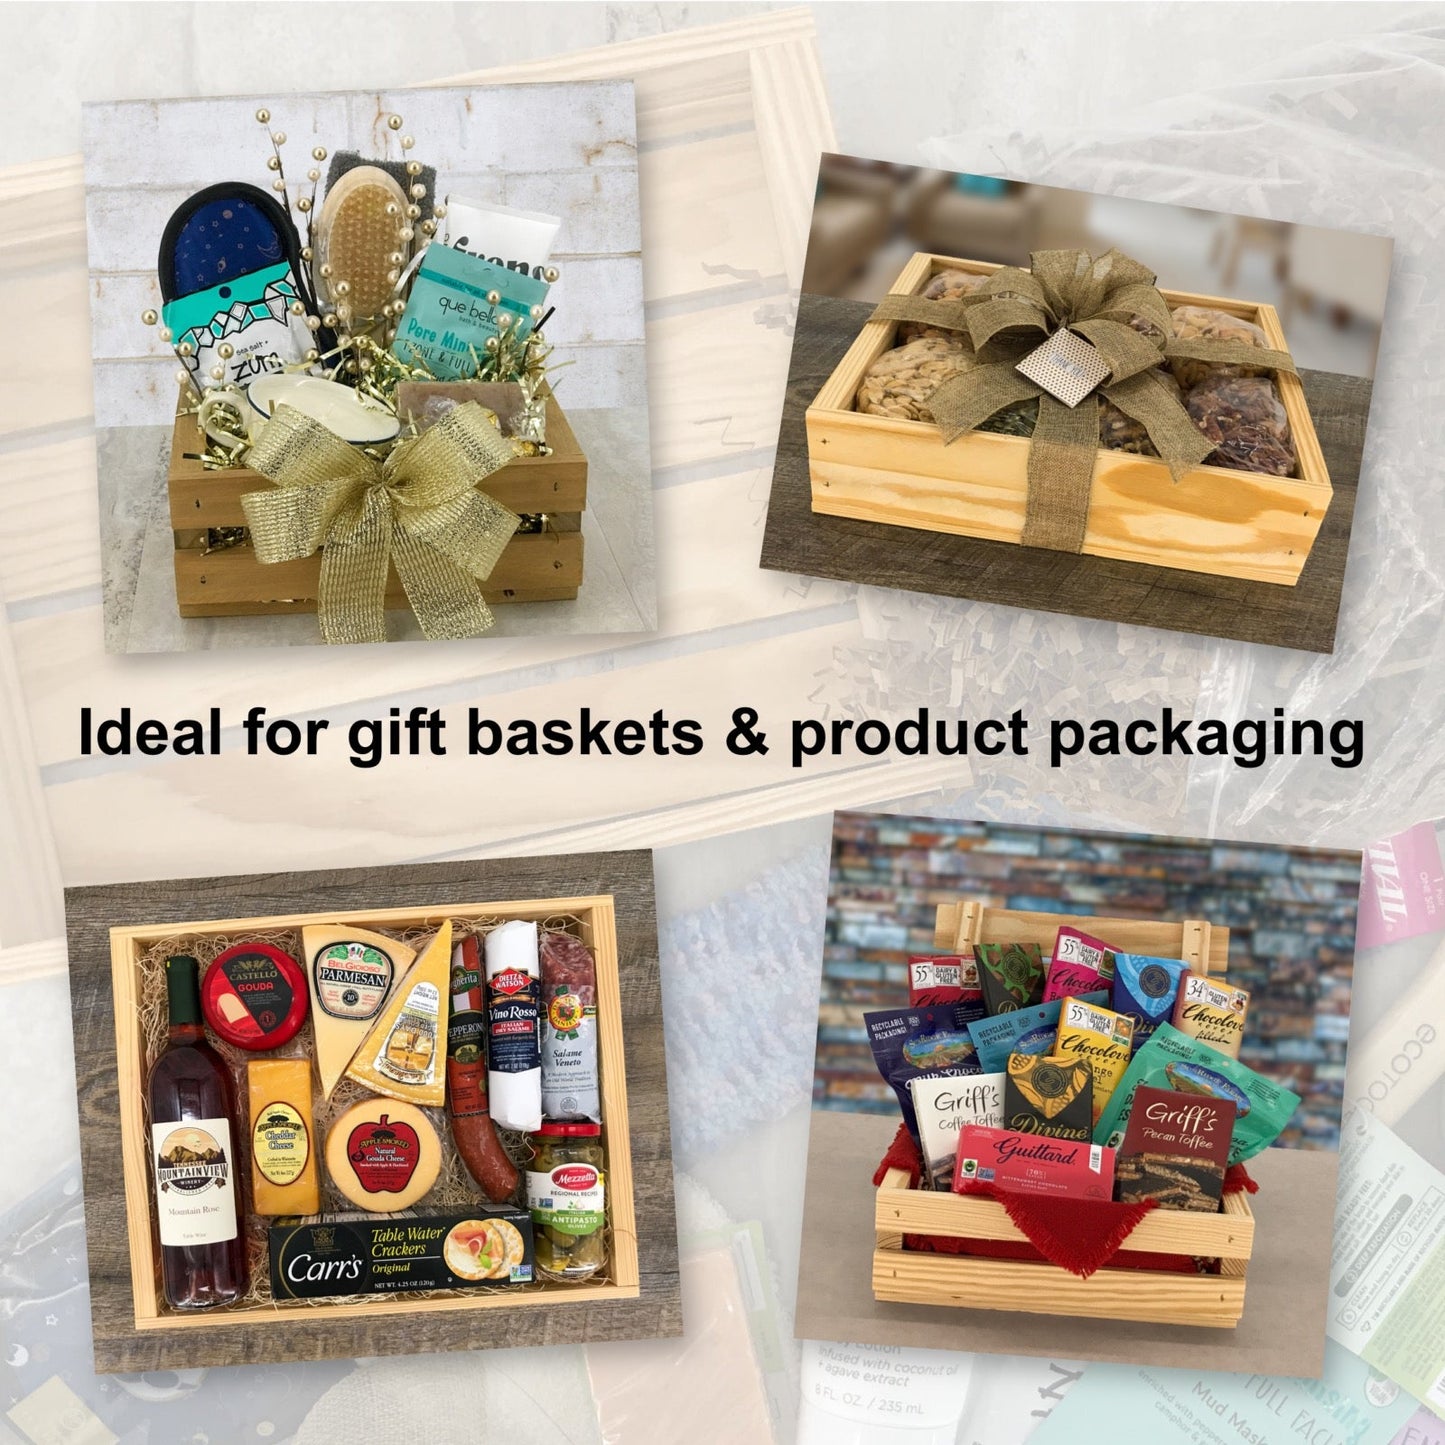 Ideal for gift baskets and product packaging, SS-14-12-2.5-NX-NW-NL, 6-SS-14-12-2.5-NX-NW-NL, 12-SS-14-12-2.5-NX-NW-NL, 24-SS-14-12-2.5-NX-NW-NL, 48-SS-14-12-2.5-NX-NW-NL, 96-SS-14-12-2.5-NX-NW-NL